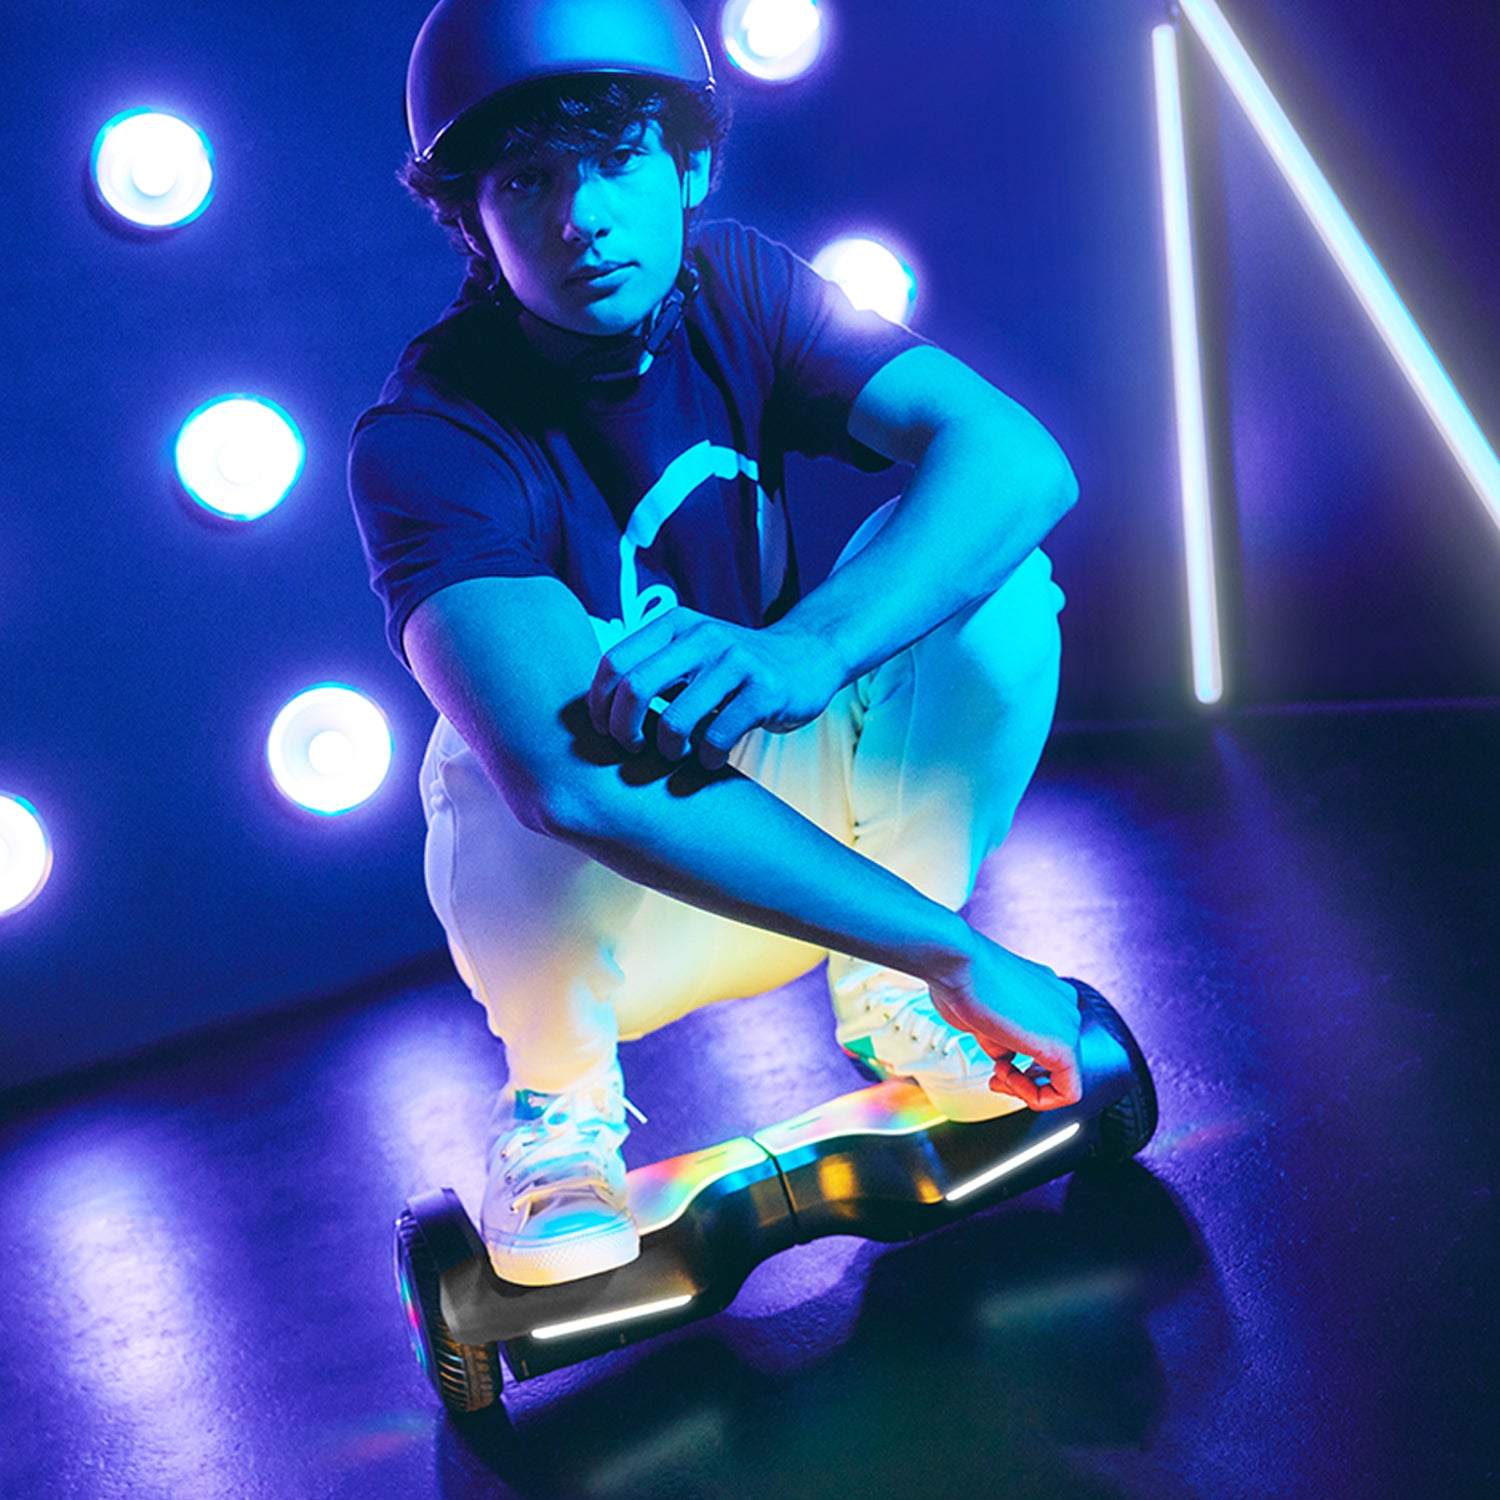 person riding on the lumino hoverboard